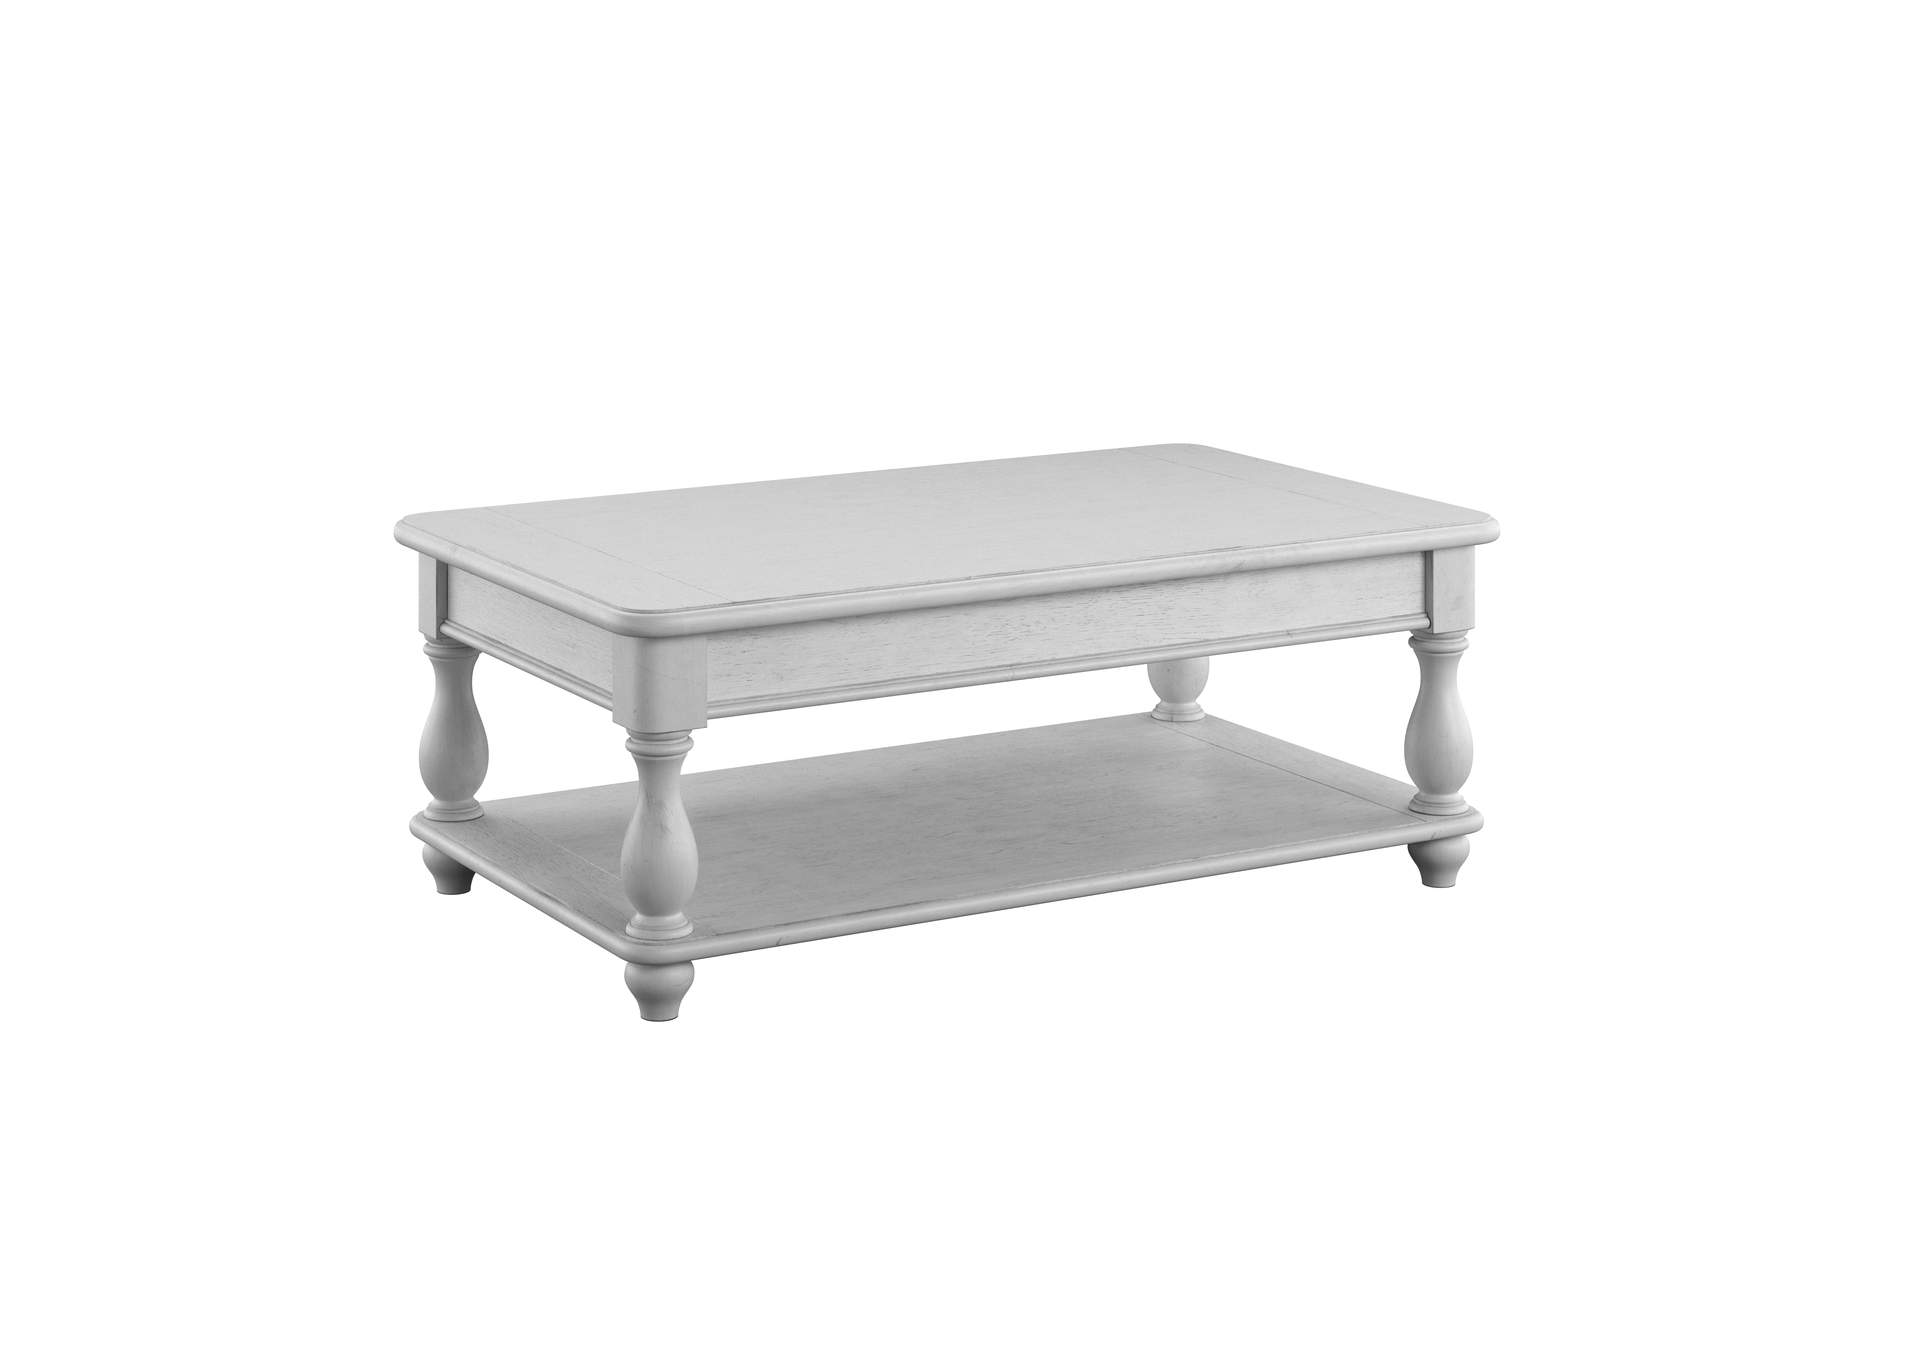 New Haven Cocktail Table,Emerald Home Furnishings